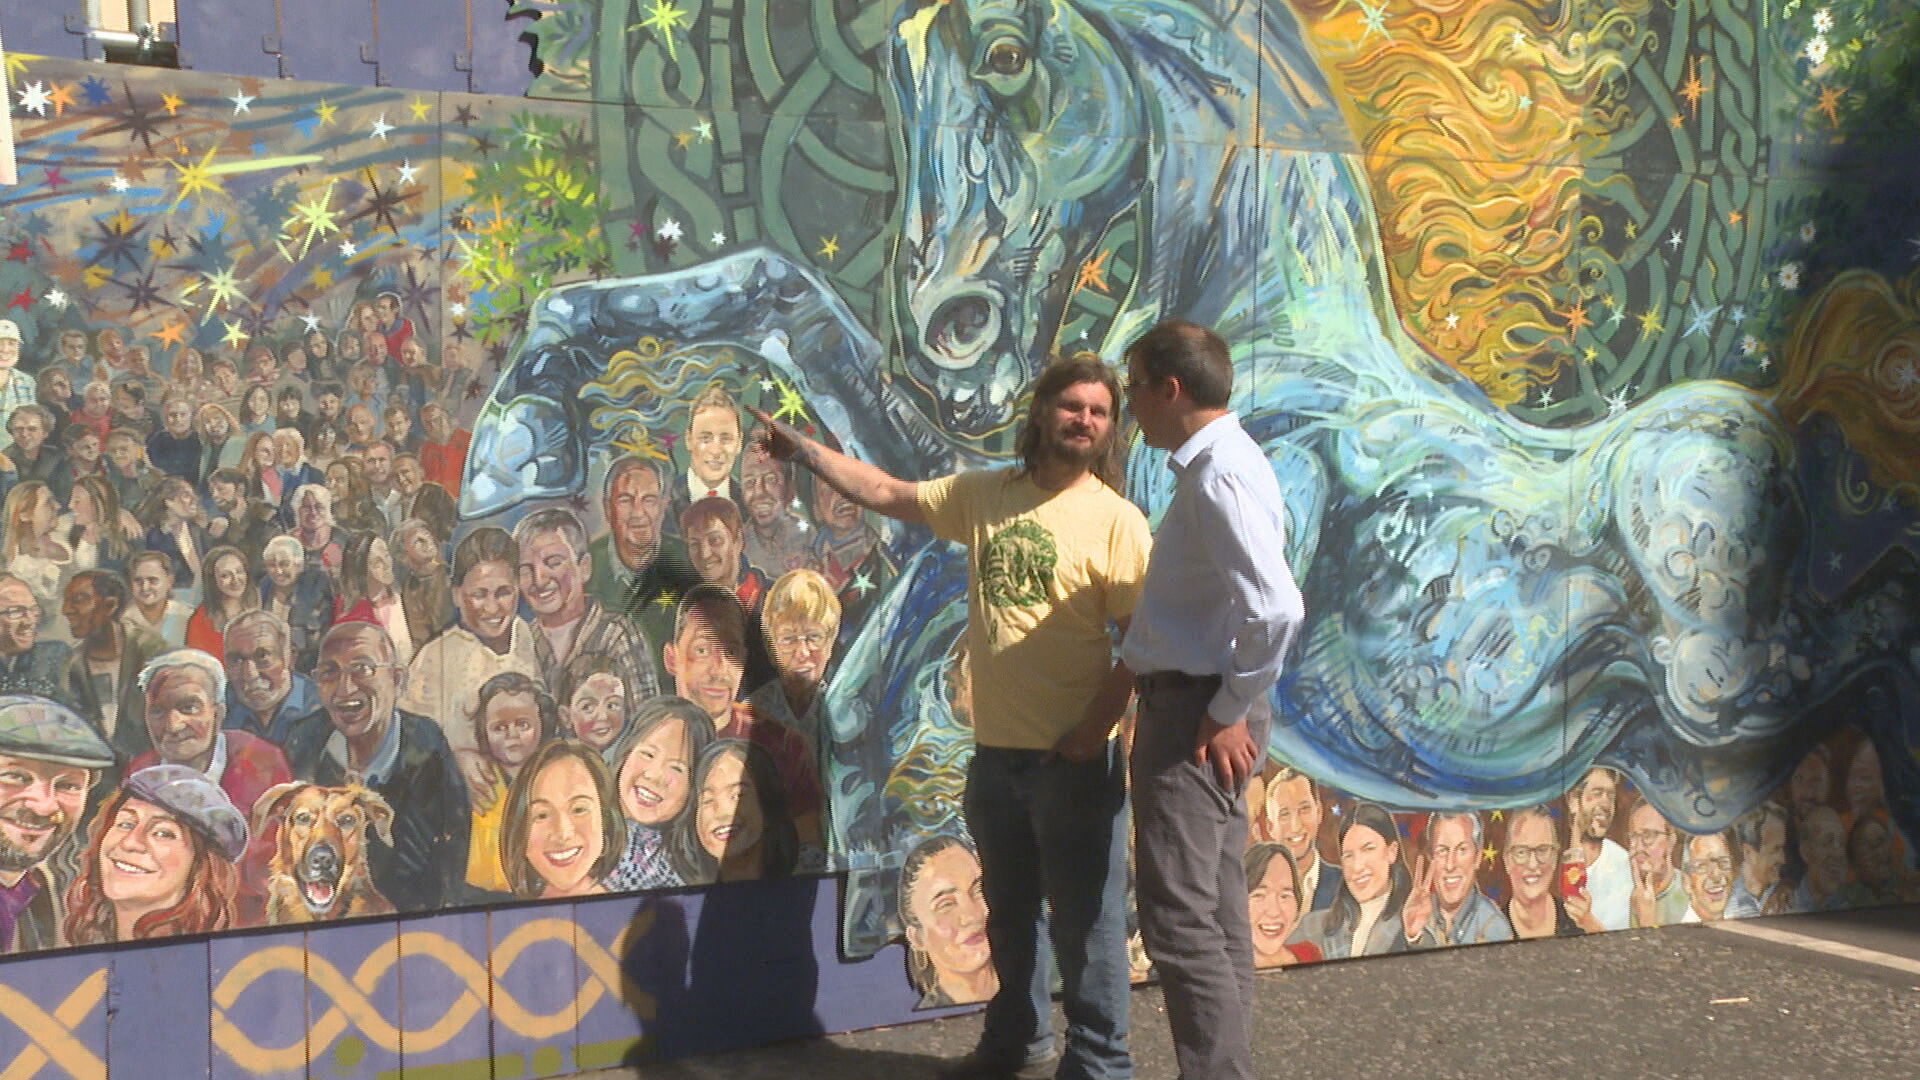 Councillor Scott Arthur expects the work of art to bring crowds to the area in construction. 